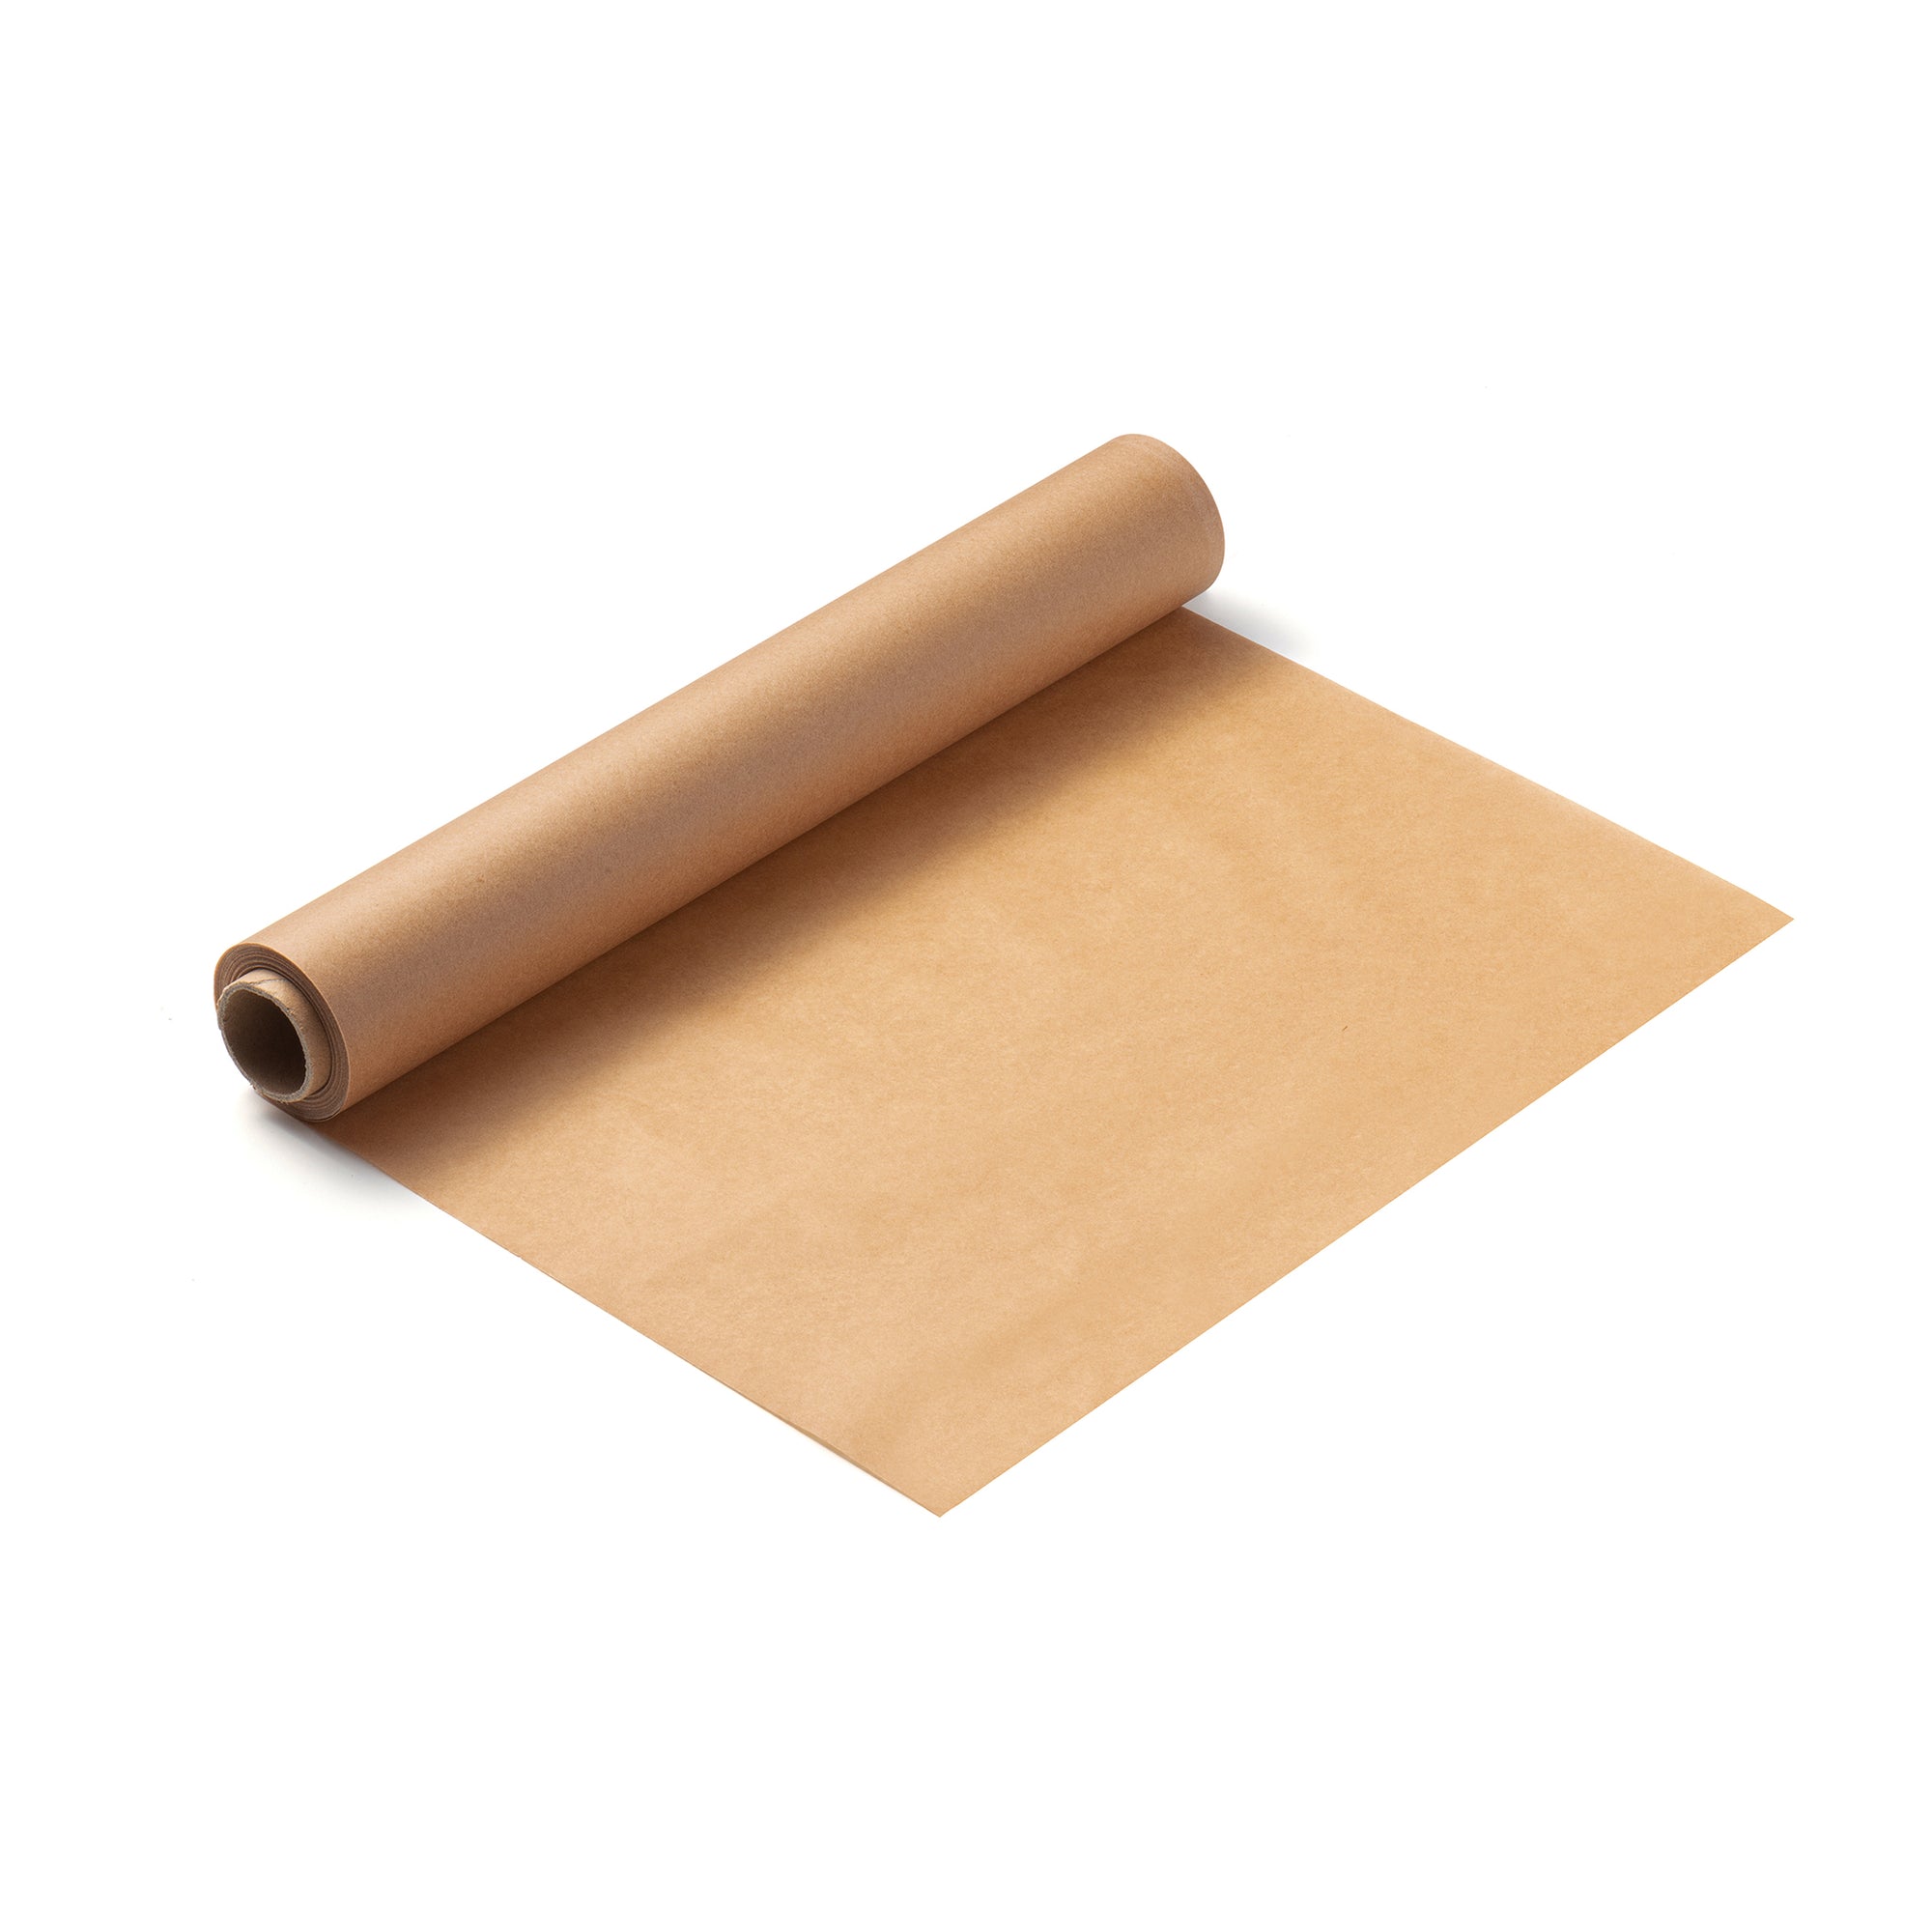 GoodCook 12 x 20 (20 Sq. ft.) Heat-Safe Parchment Paper Roll in